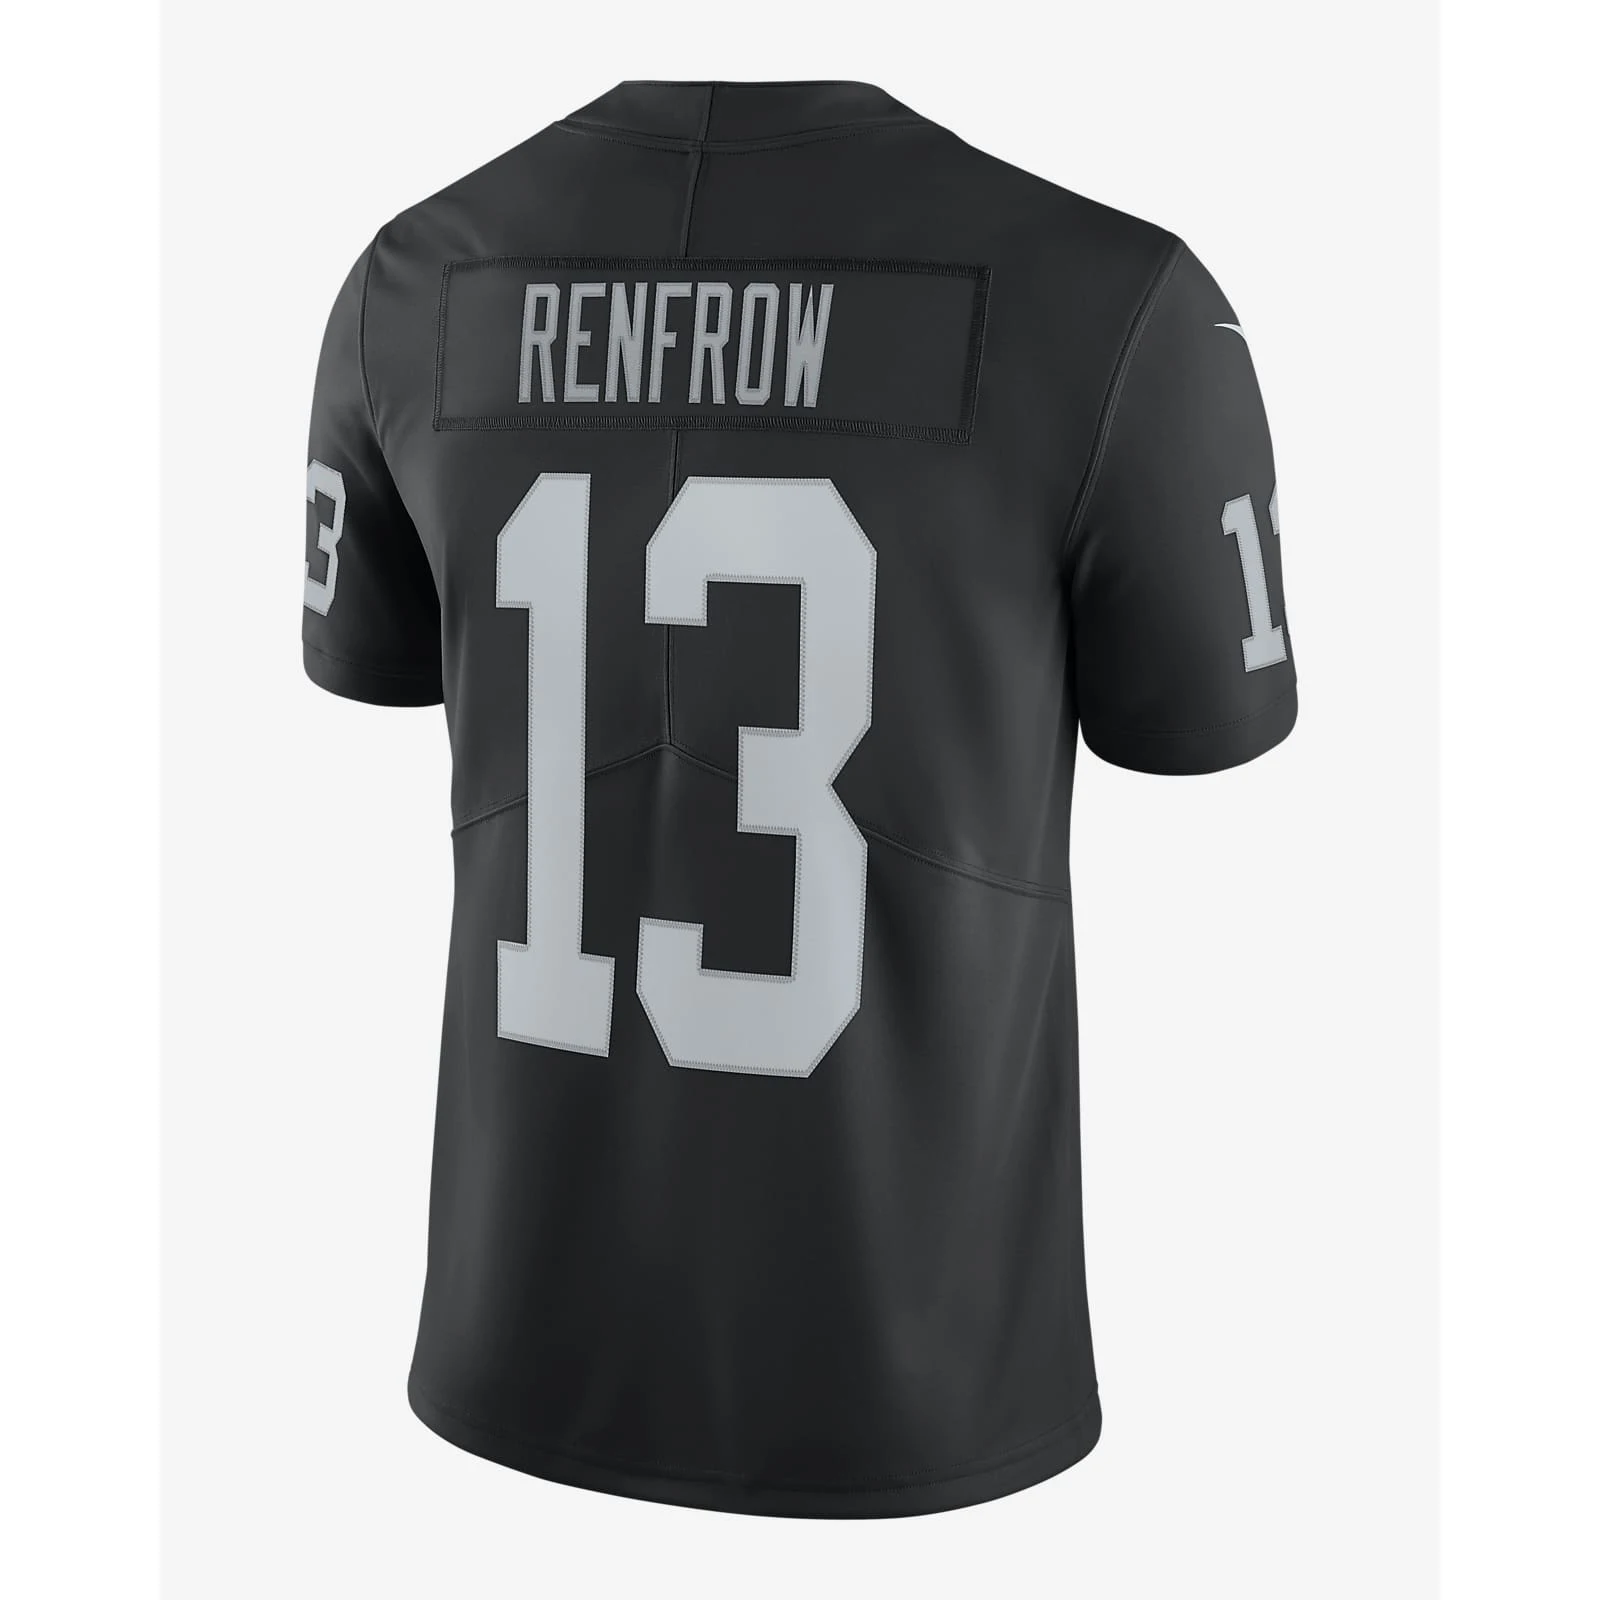 

Customized Stitch Embroidery Letters American Football Jersey 13 Hunter Renfrow Men's Black White Las Vegas Limited Jersey